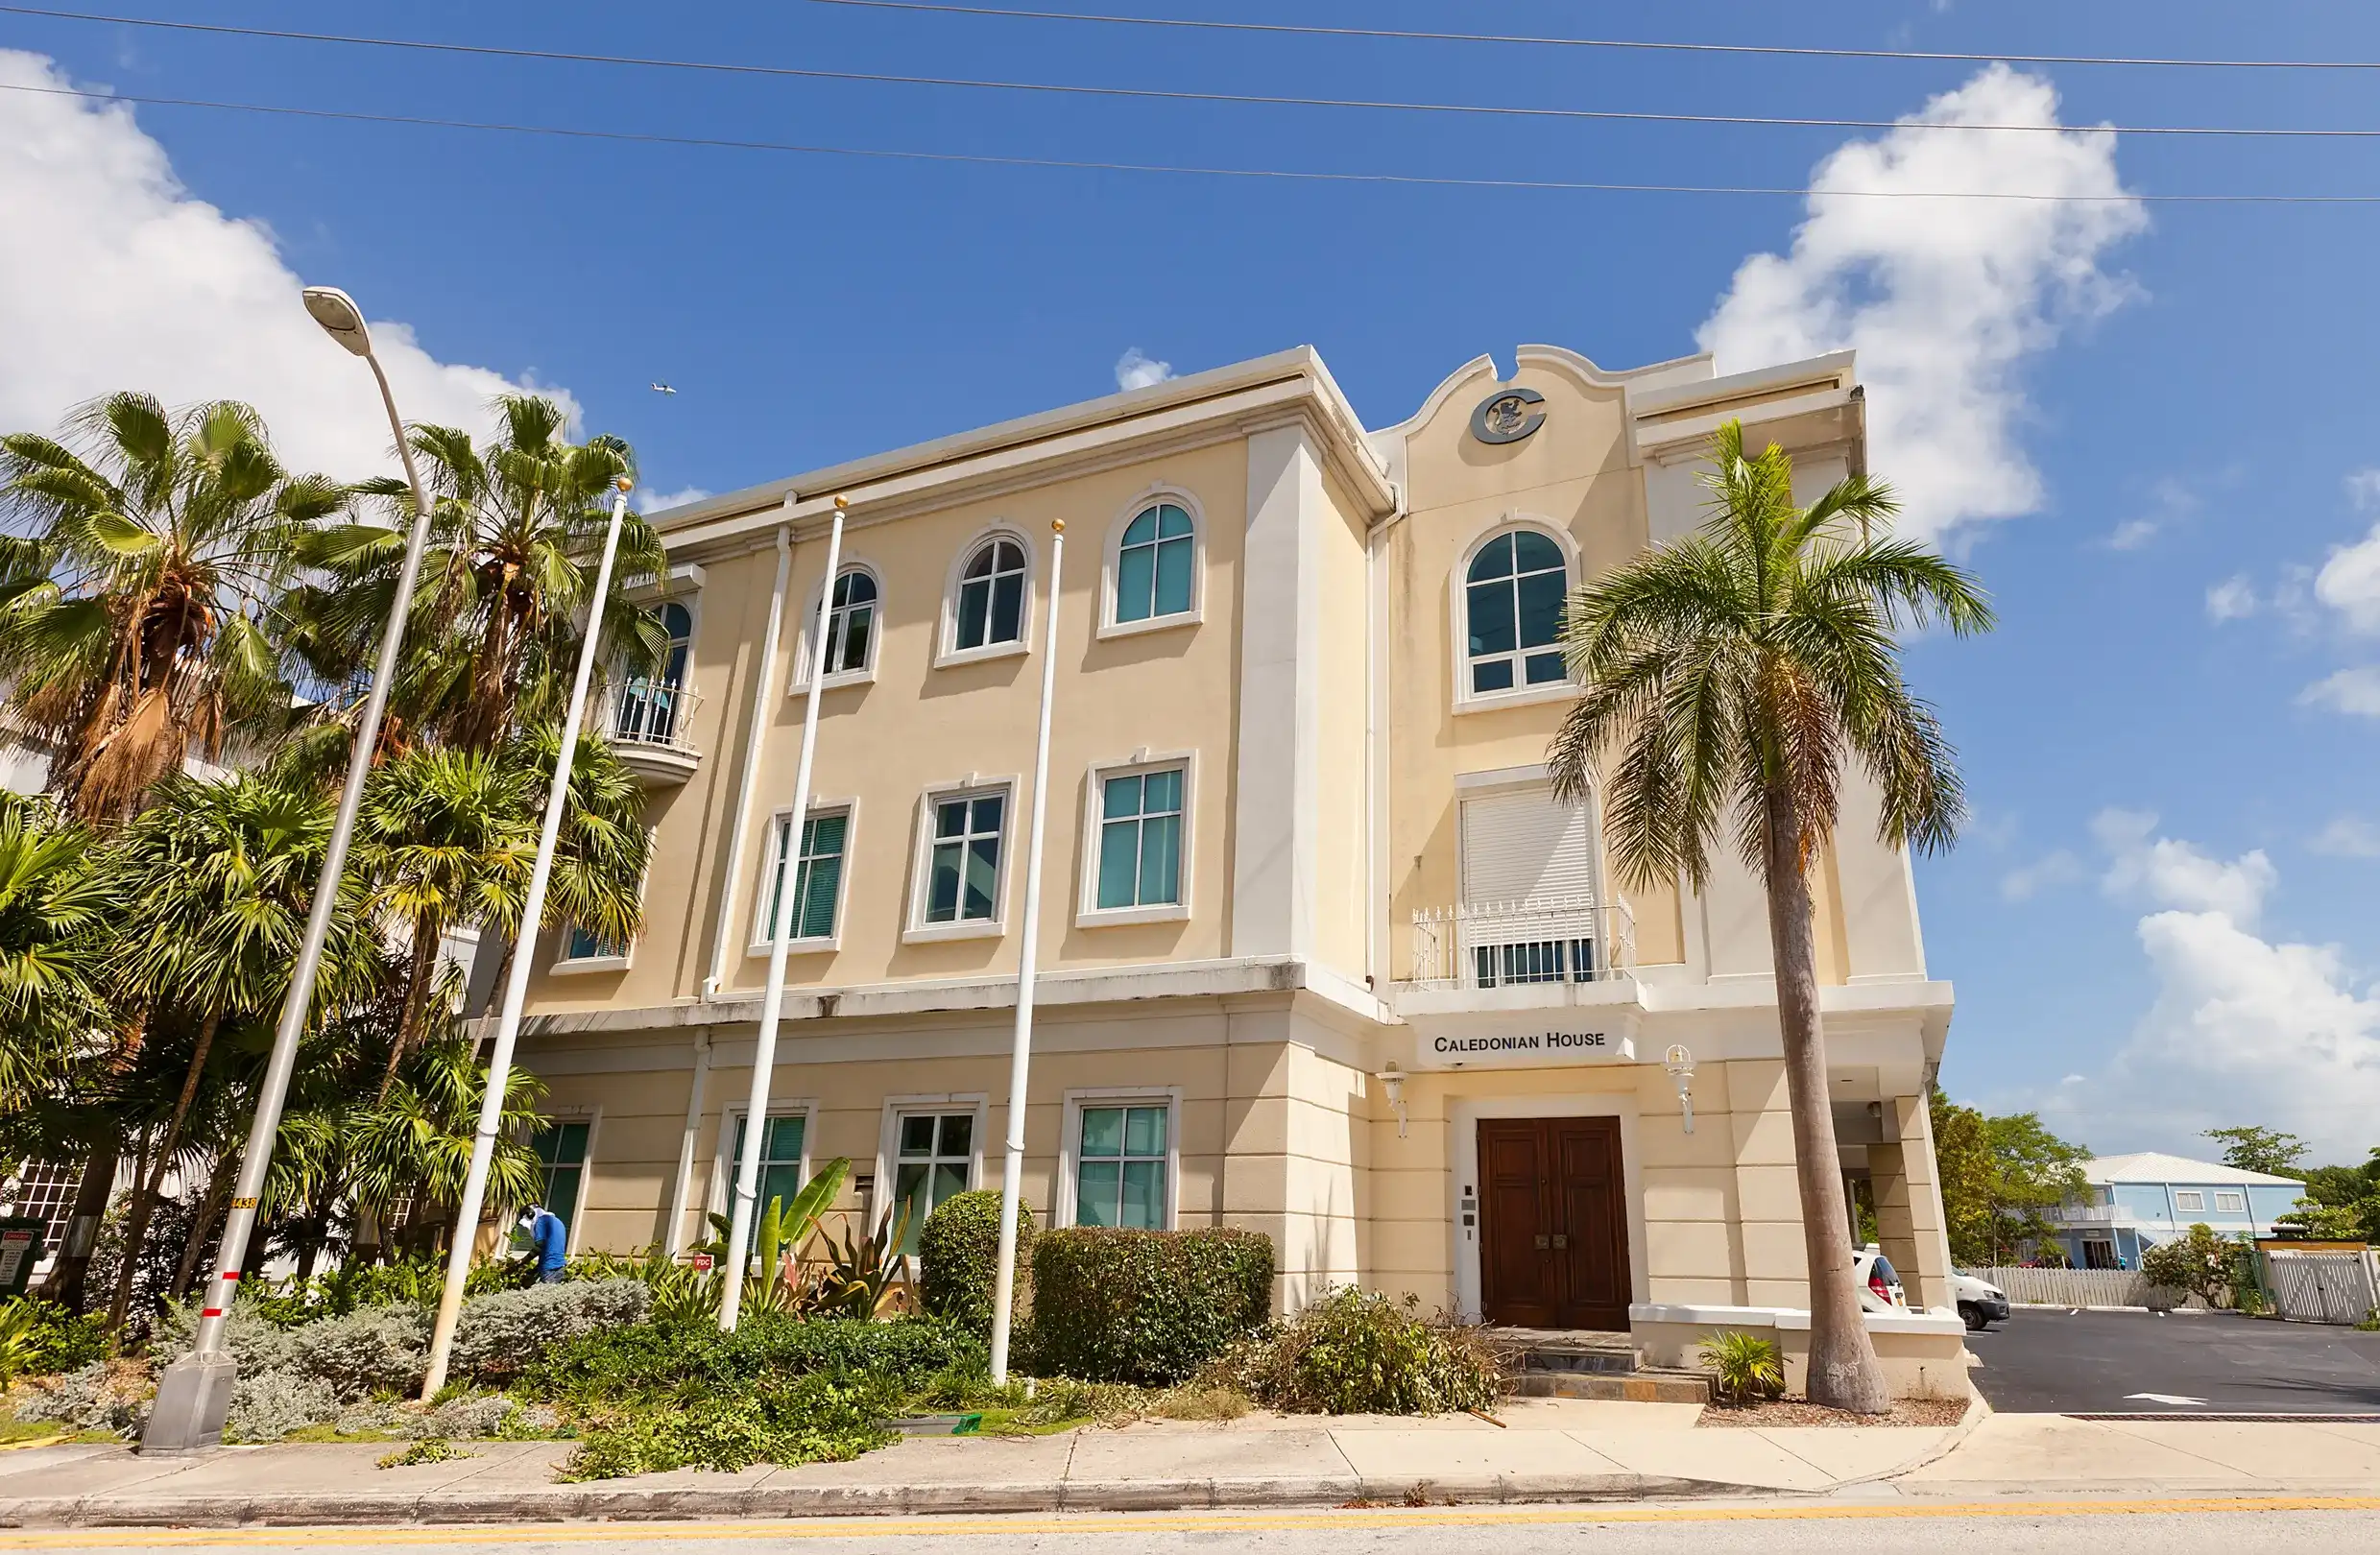 George Town hotels. Best hotels in George Town, Cayman Islands